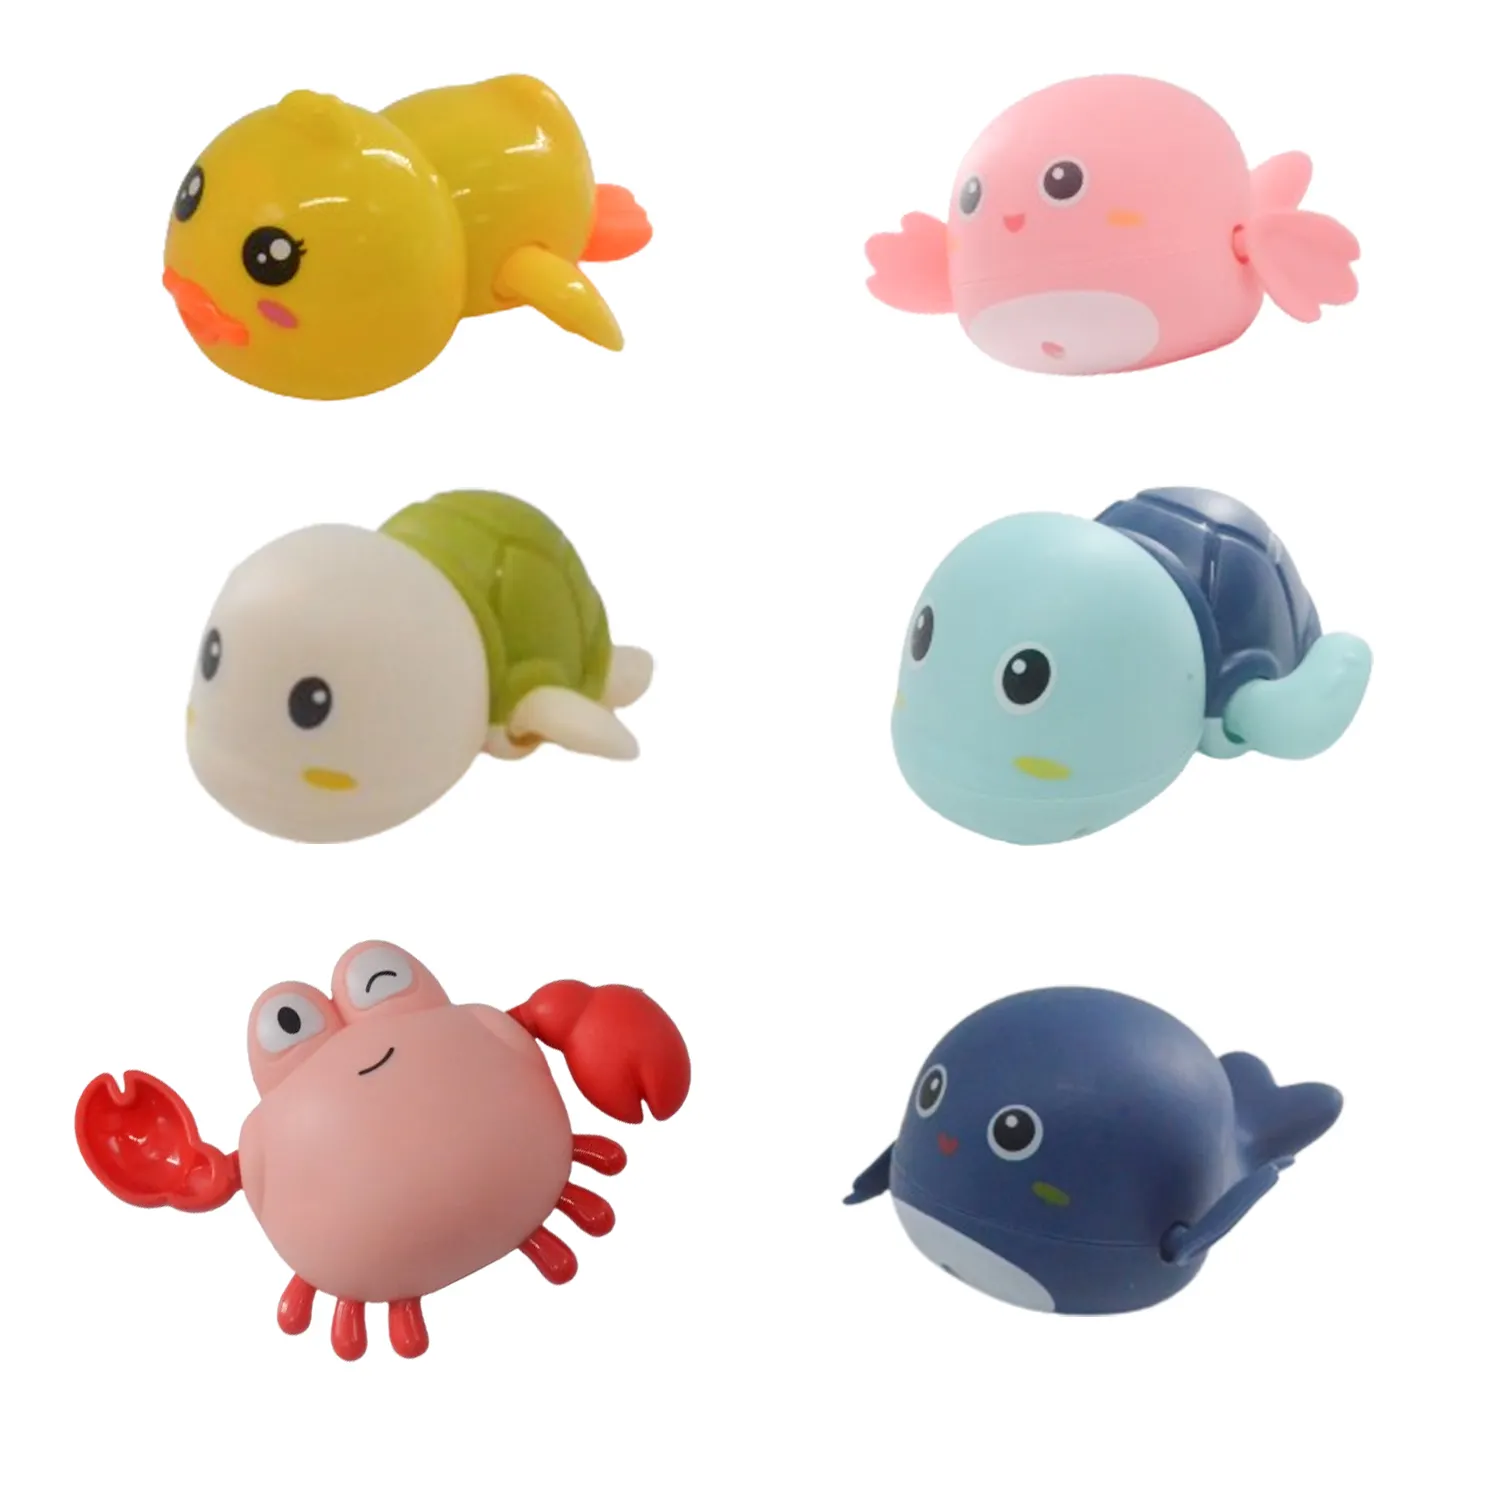 New Hot Sale Summer Baby Bathtub Floating Wind-up Cute Animal Swimming Pool Games Water Play Set Bath Toys for Kids